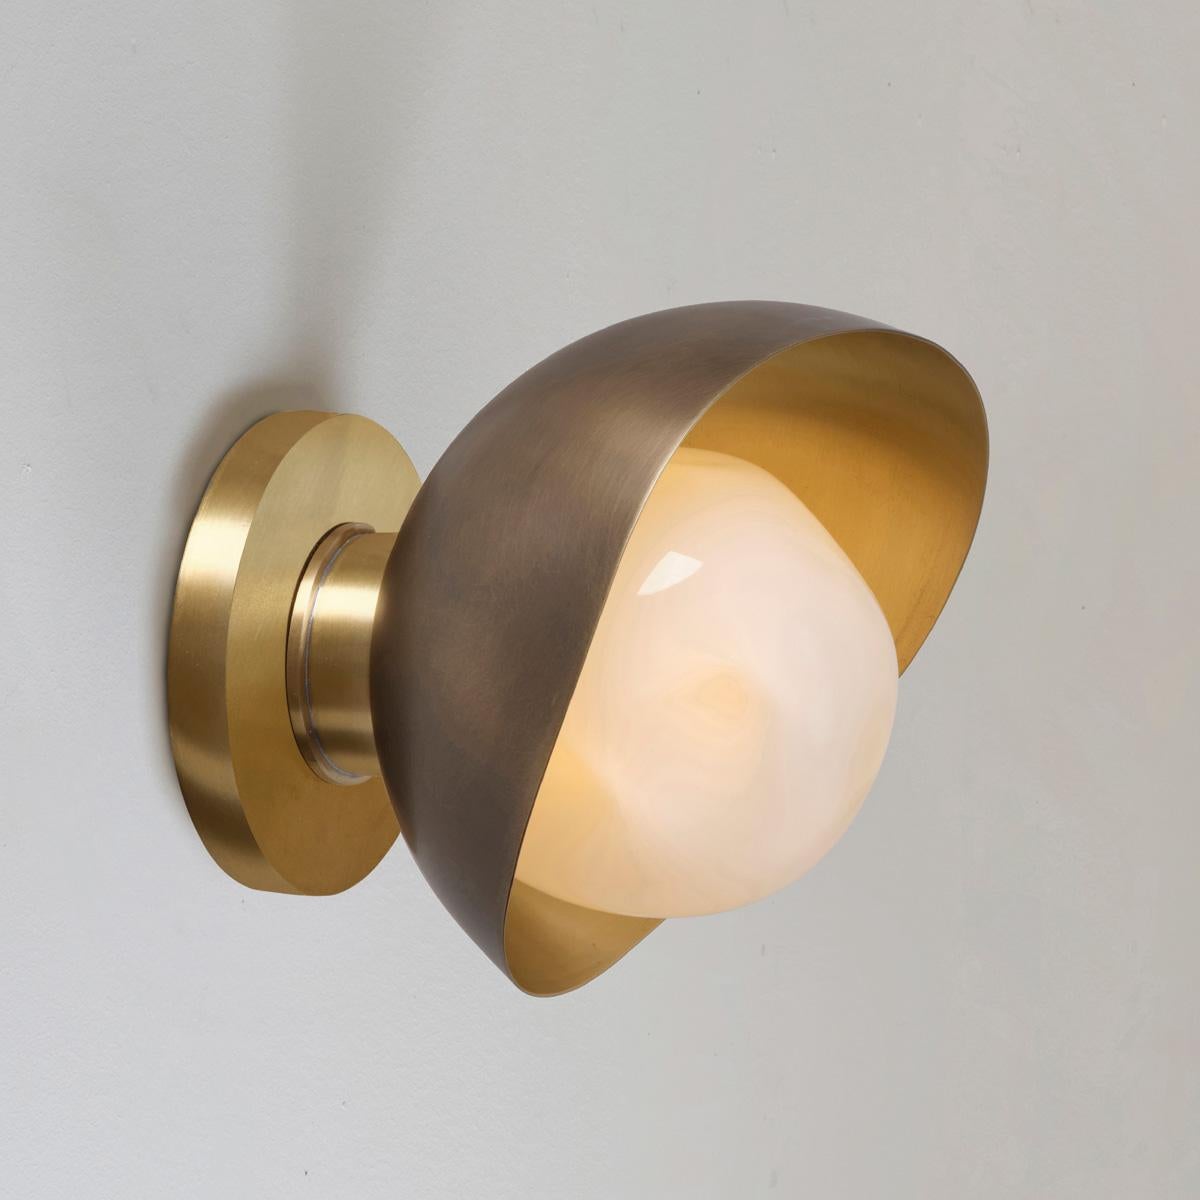 The Perla Mini wall light is the smallest member of the Perla collection featuring an organic brass shell nestling our Sfera glass handblown in Murano. See the Perla and Perla Grande for larger models.

The primary images show it in Bronzo Nuvolato